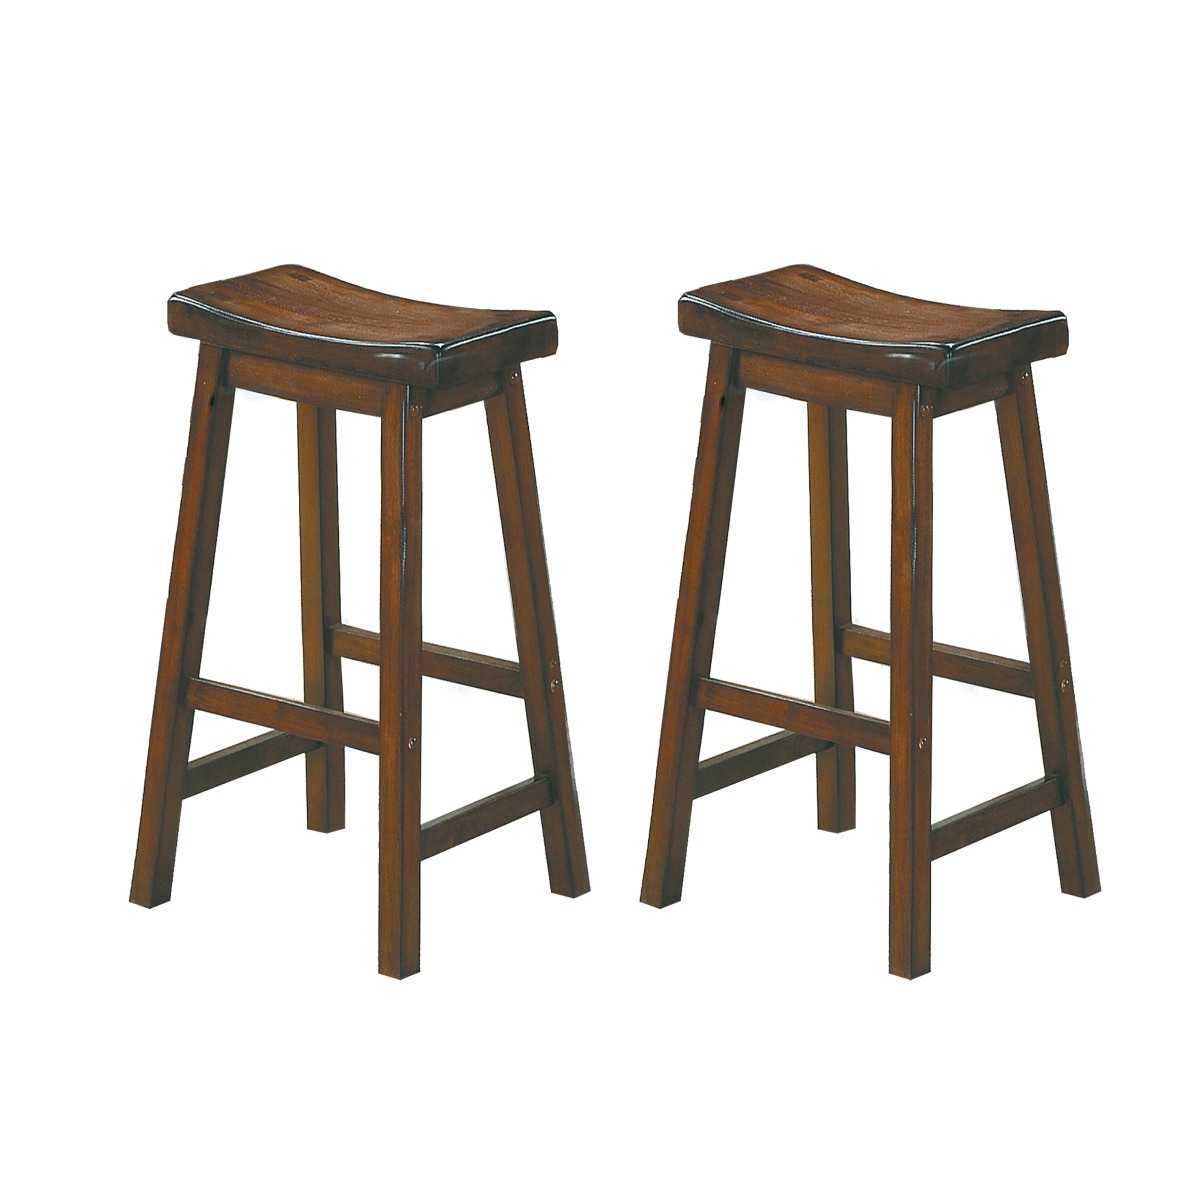 Wooden 29 Counter Height Stool With Saddle Seat, Distressed Cherry, Set Of 2- Saltoro Sherpi